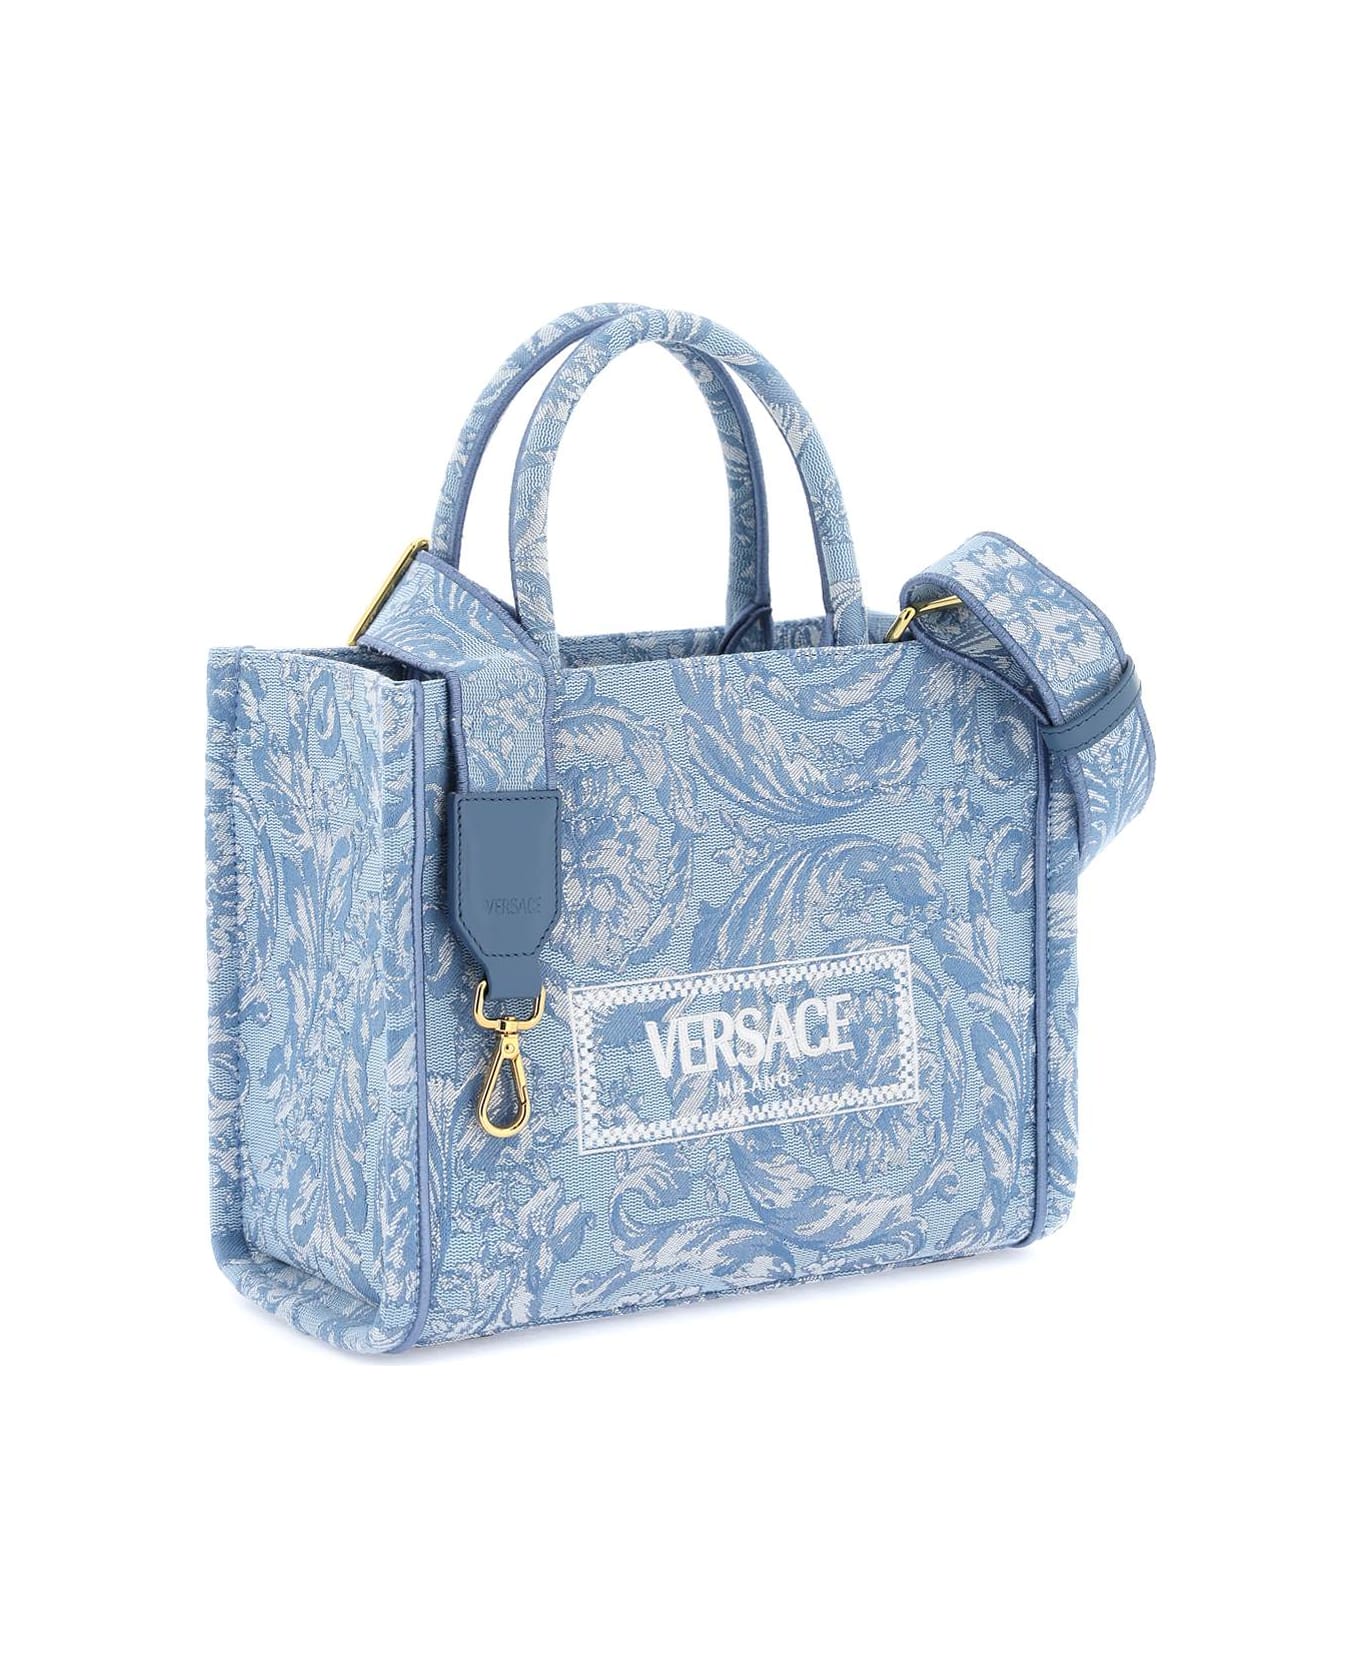 Versace Athena Barocco Small Tote Bag - BABY BLUE GENTIAN BLUE ORO VERSACE (Light blue)